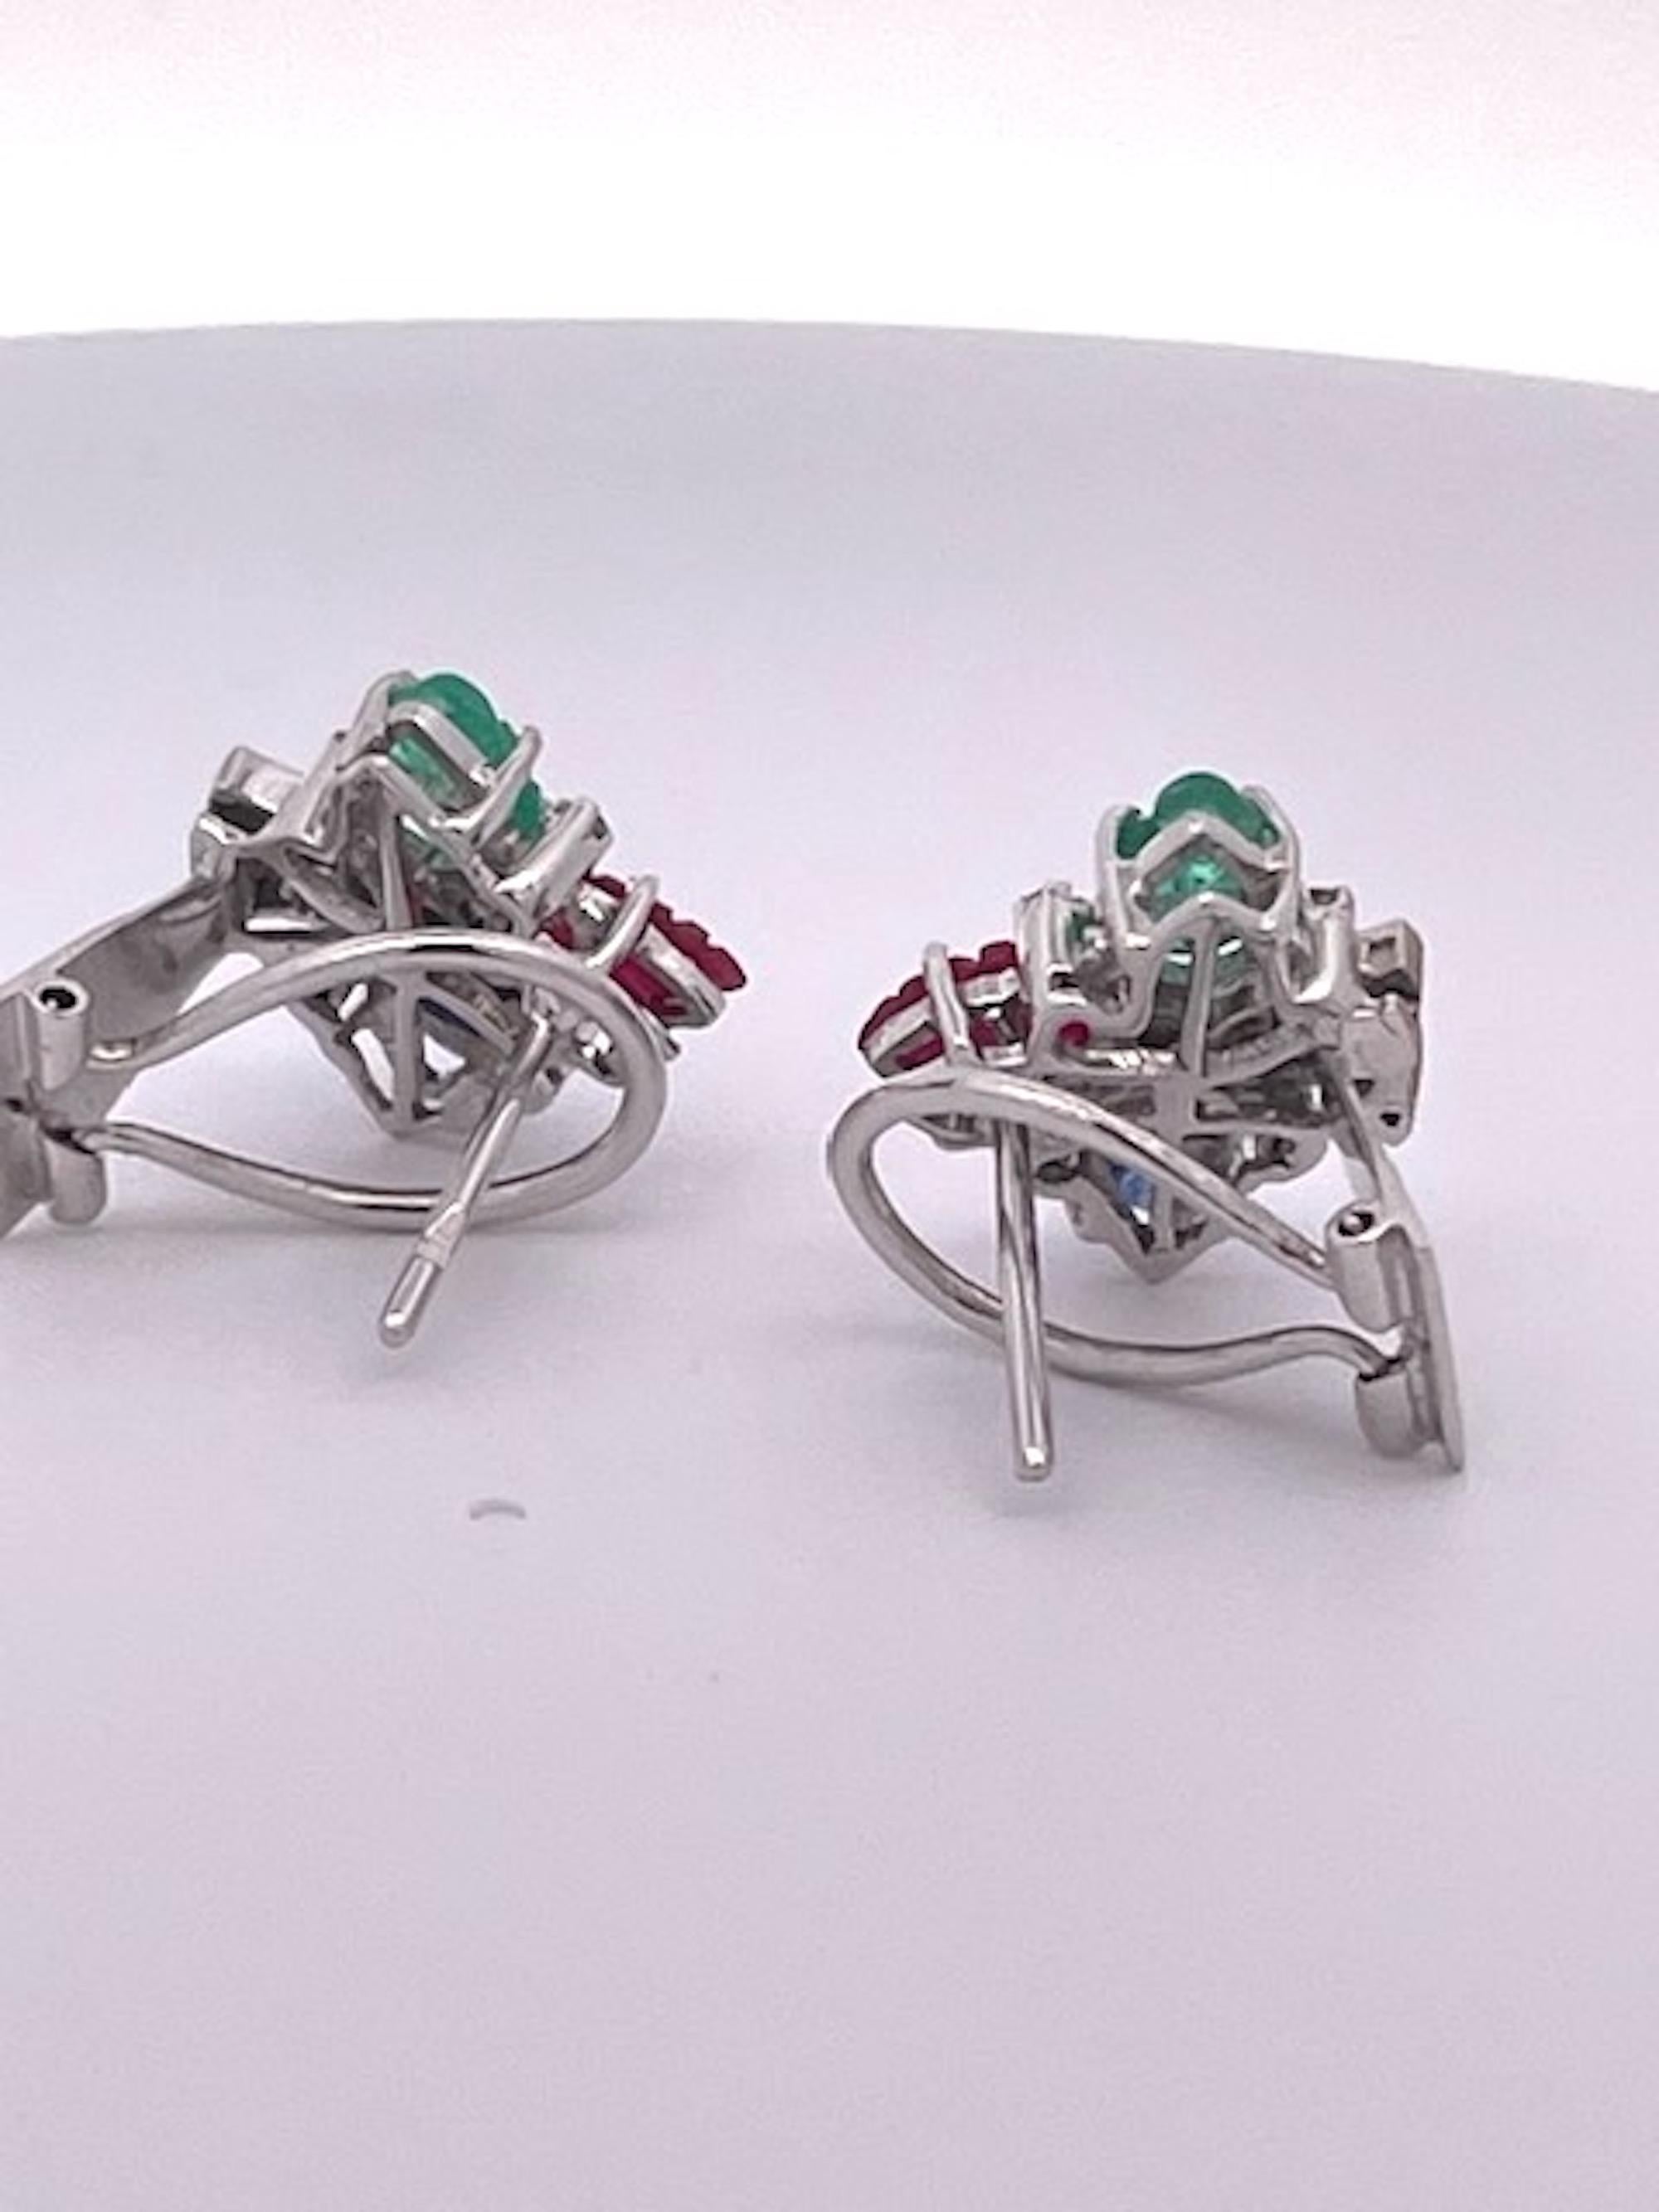 Tutti Frutti Earrings 18k White Gold In Excellent Condition For Sale In North Hollywood, CA